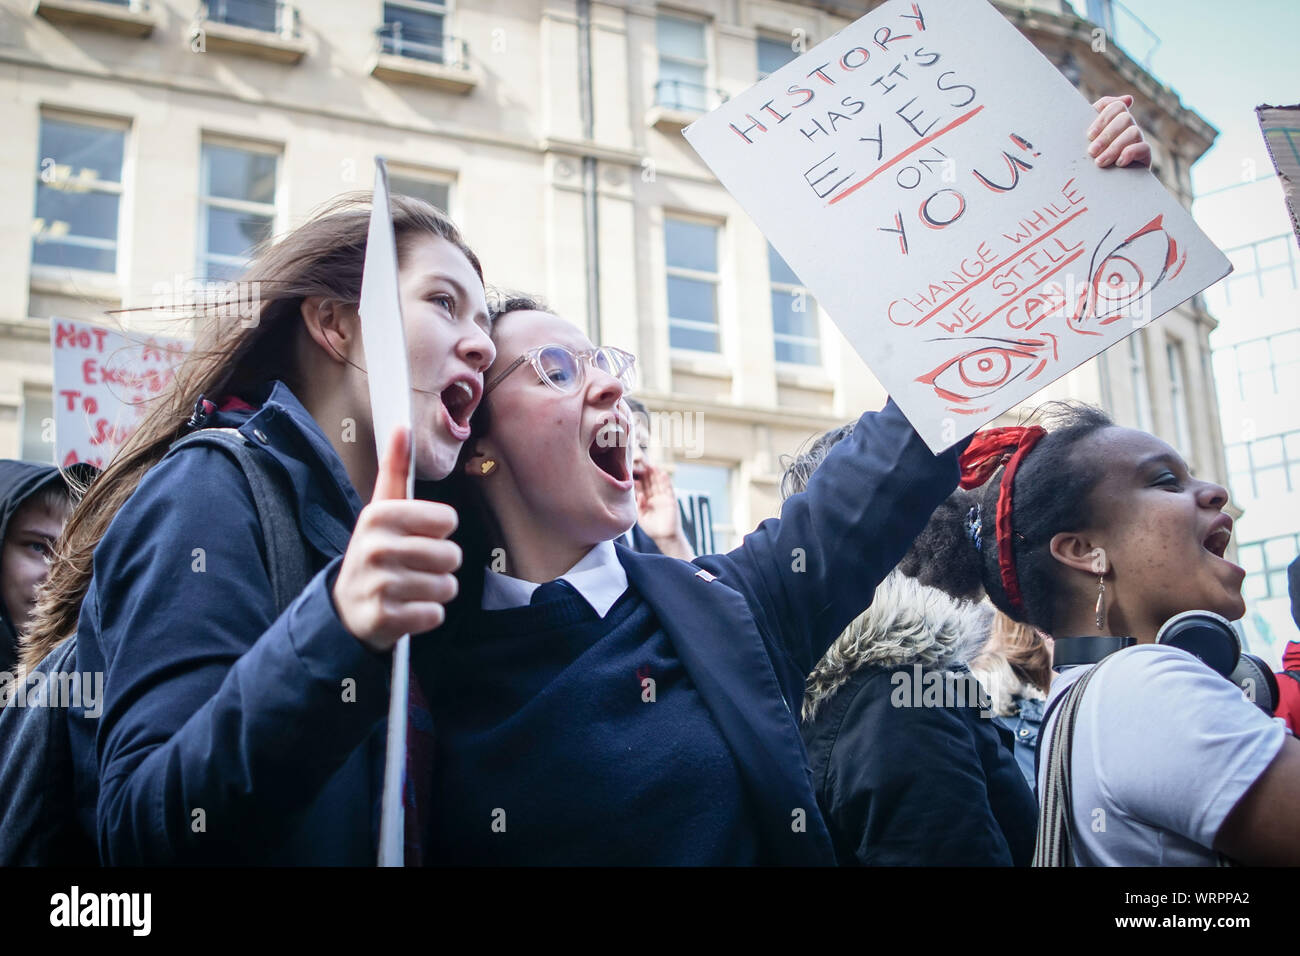 High school students shout slogans during a protest outside the Town Hall in Sheffield. Credits Ioannis Alexopoulos / Alamy Stock Photo